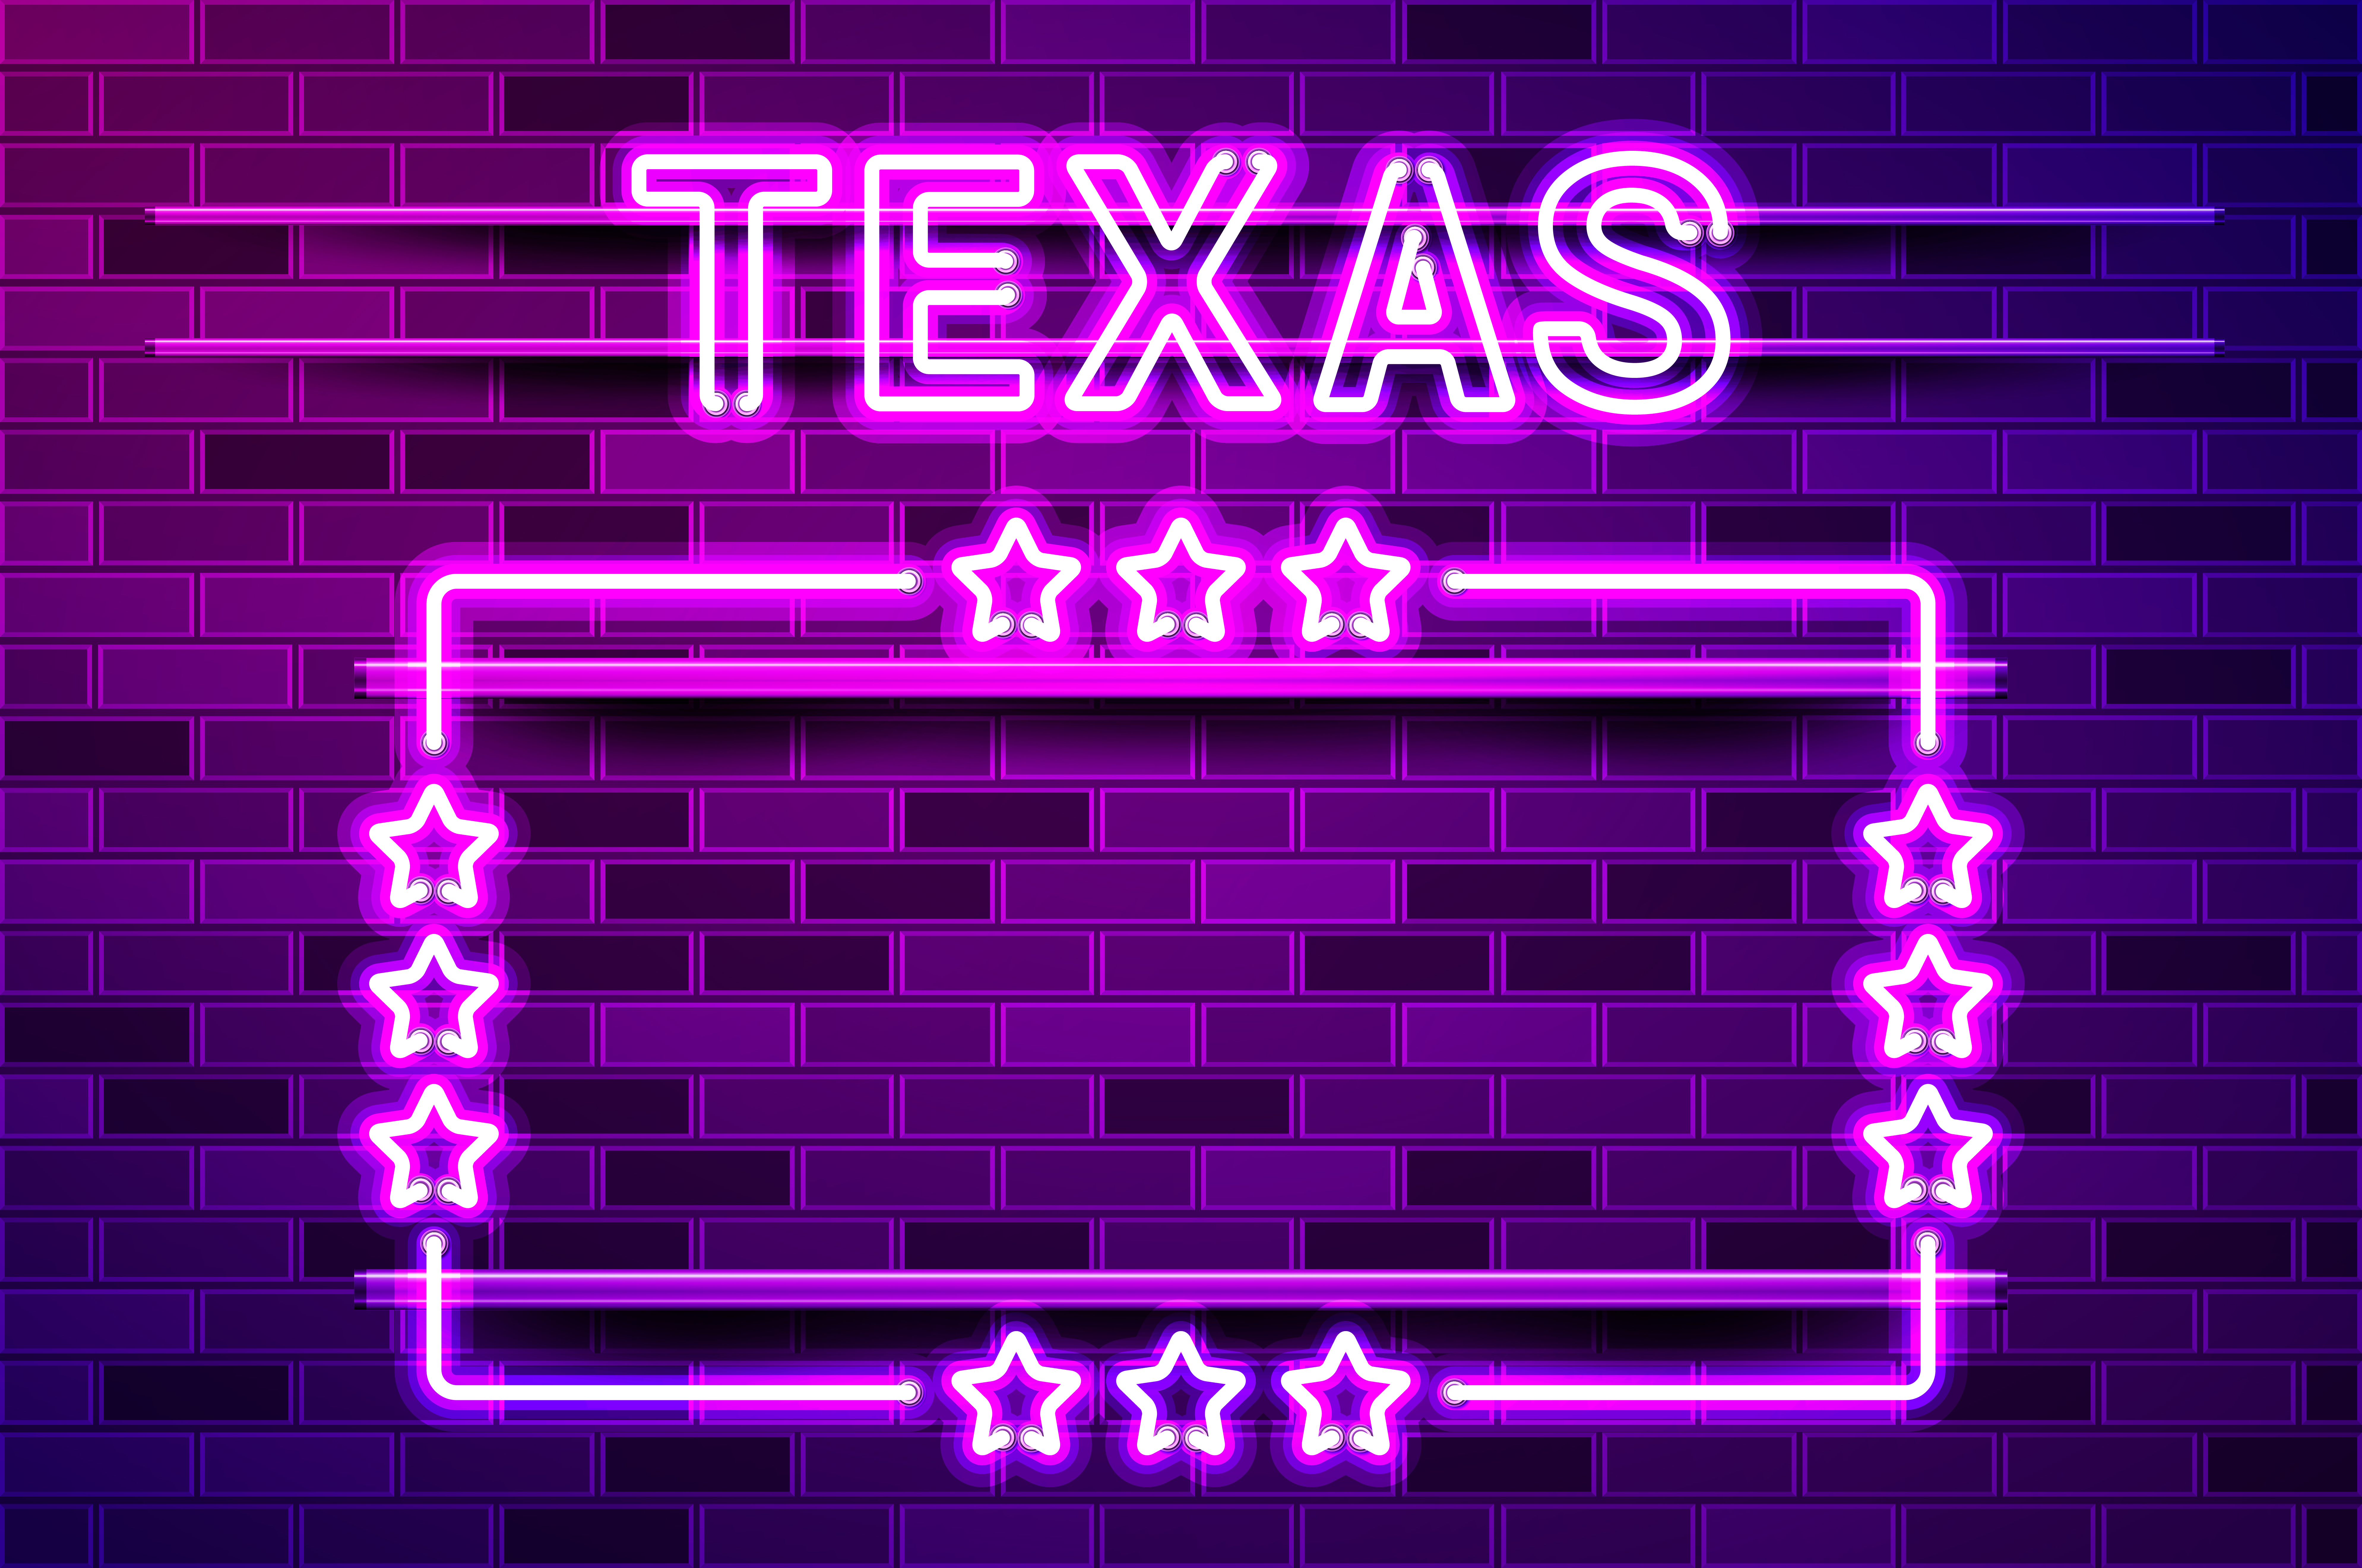 Texas US State glowing purple neon lettering and a rectangular frame with stars. Realistic vector illustration. Purple brick wall, violet glow, metal holders.. Texas US State glowing purple neon lettering and a rectangular frame with stars